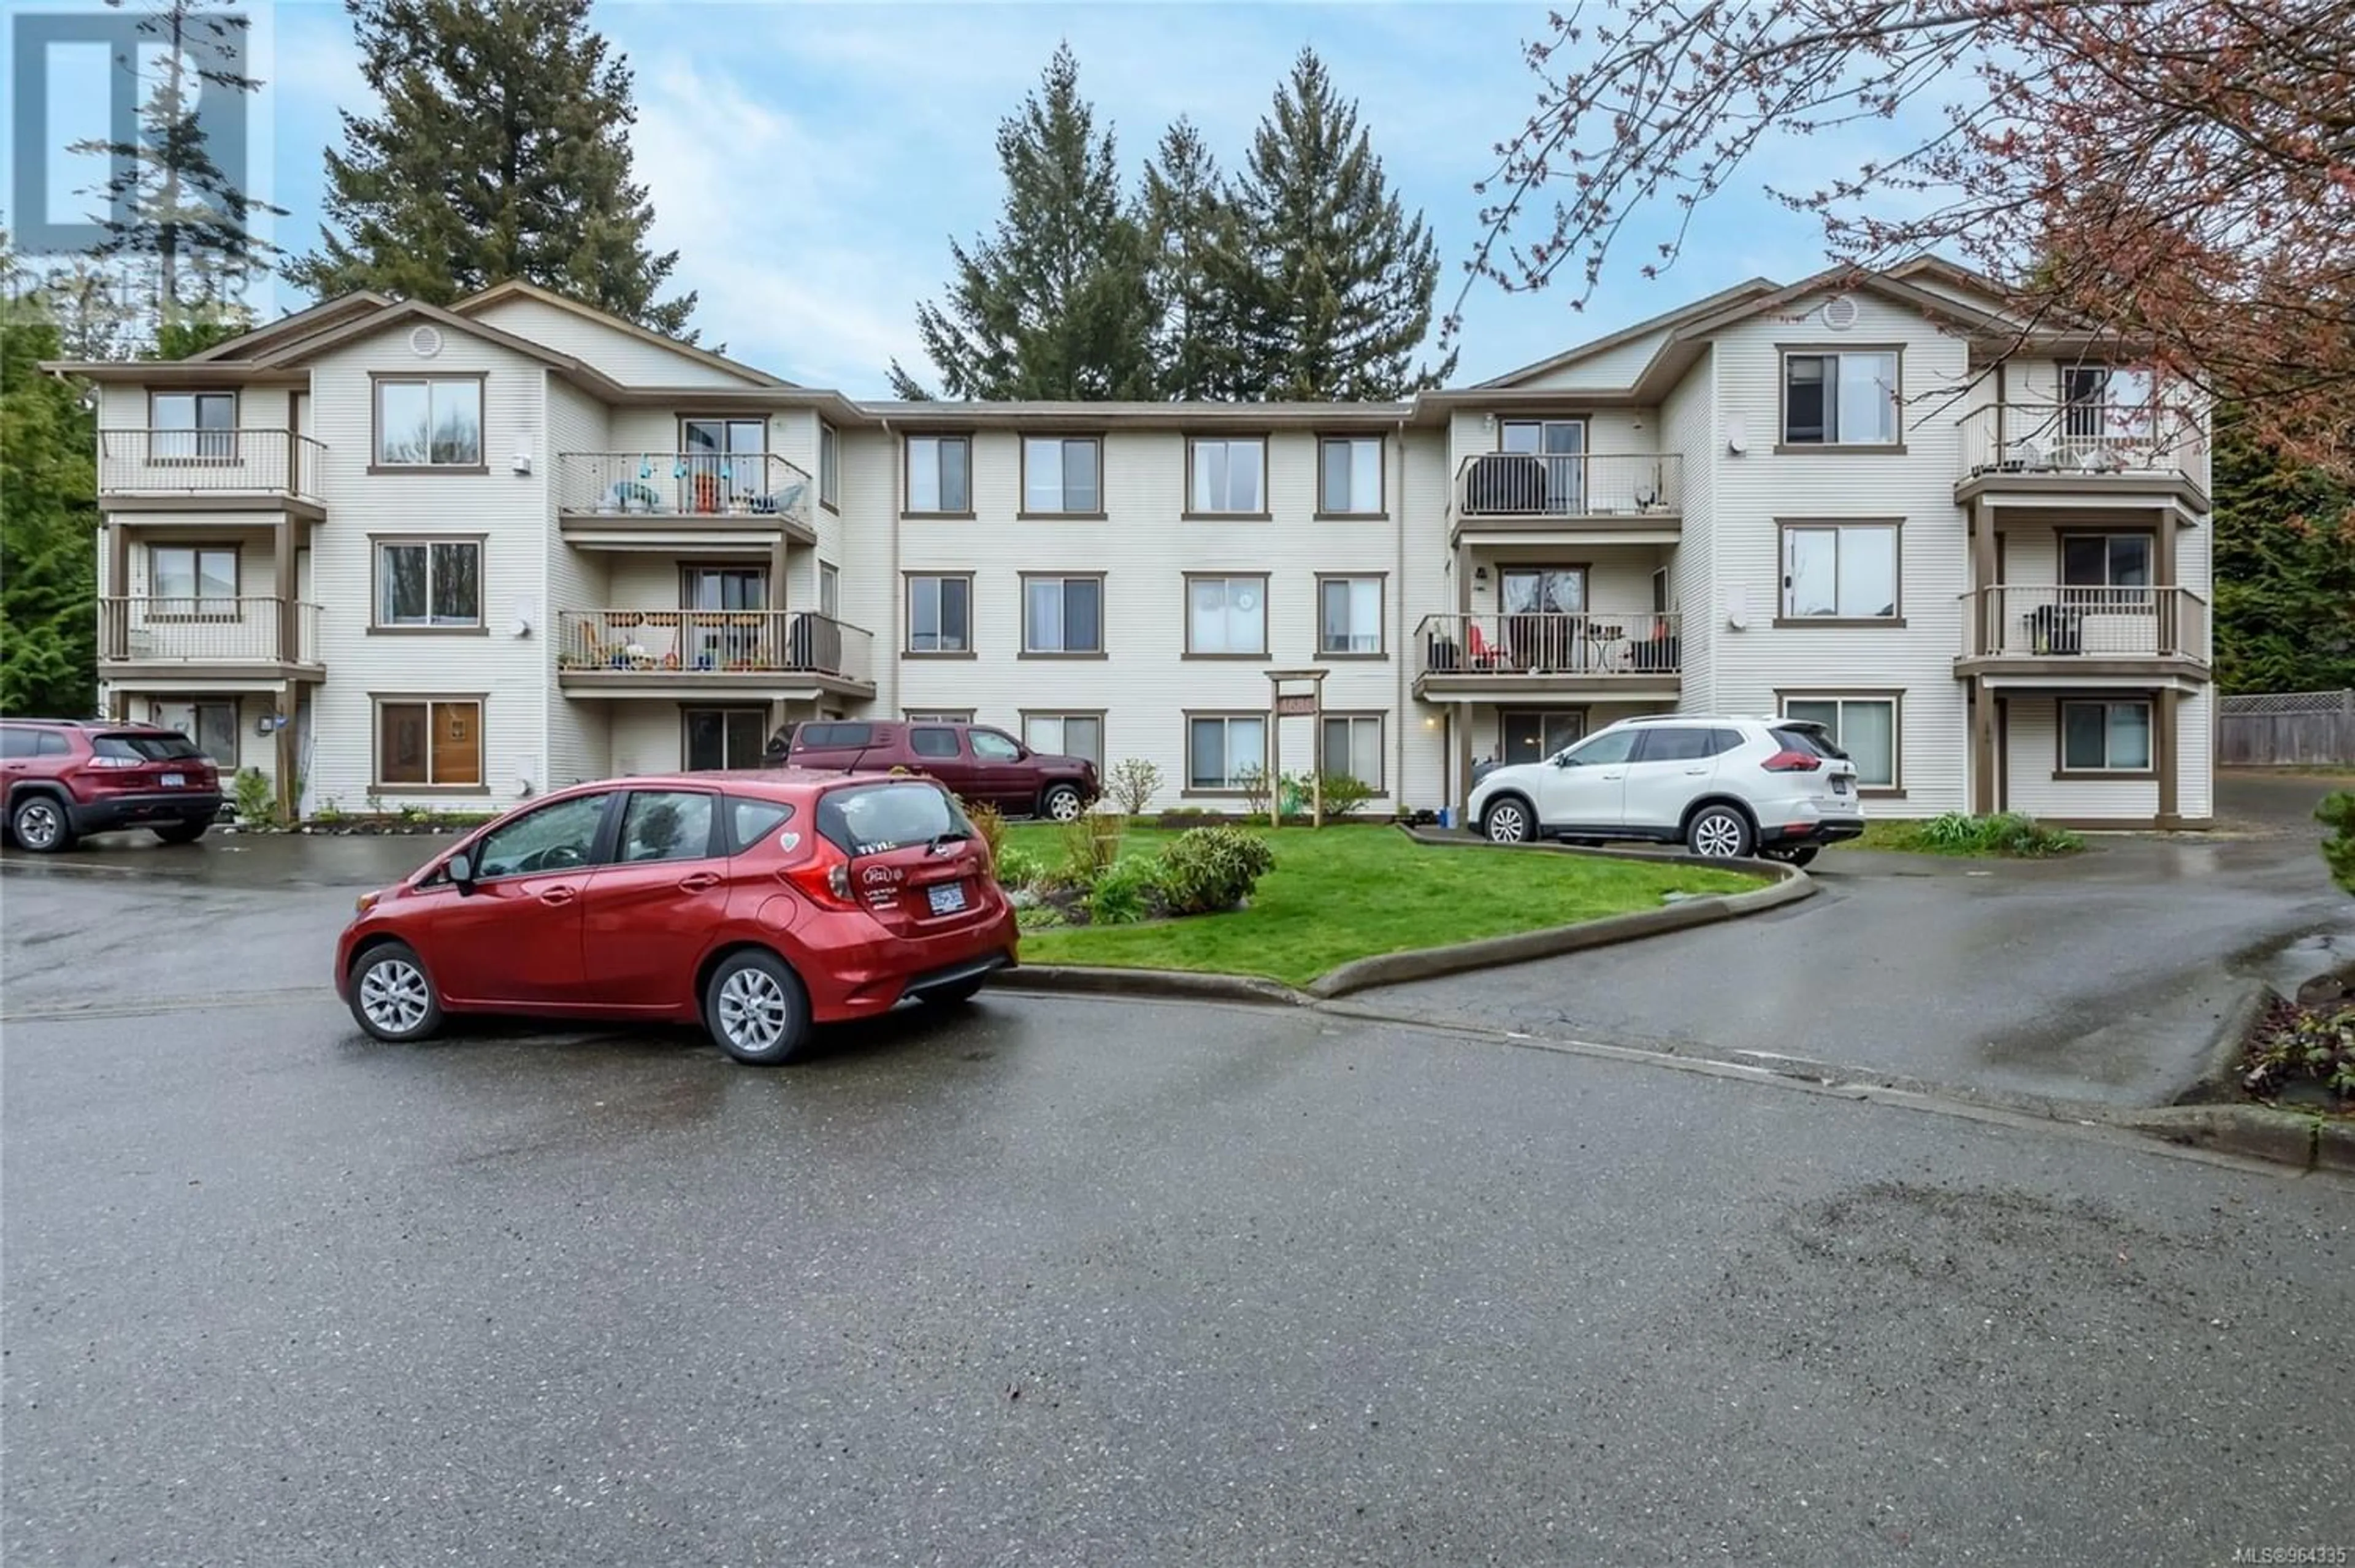 A pic from exterior of the house or condo for 204 4686 Alderwood Pl, Courtenay British Columbia V9N9A1